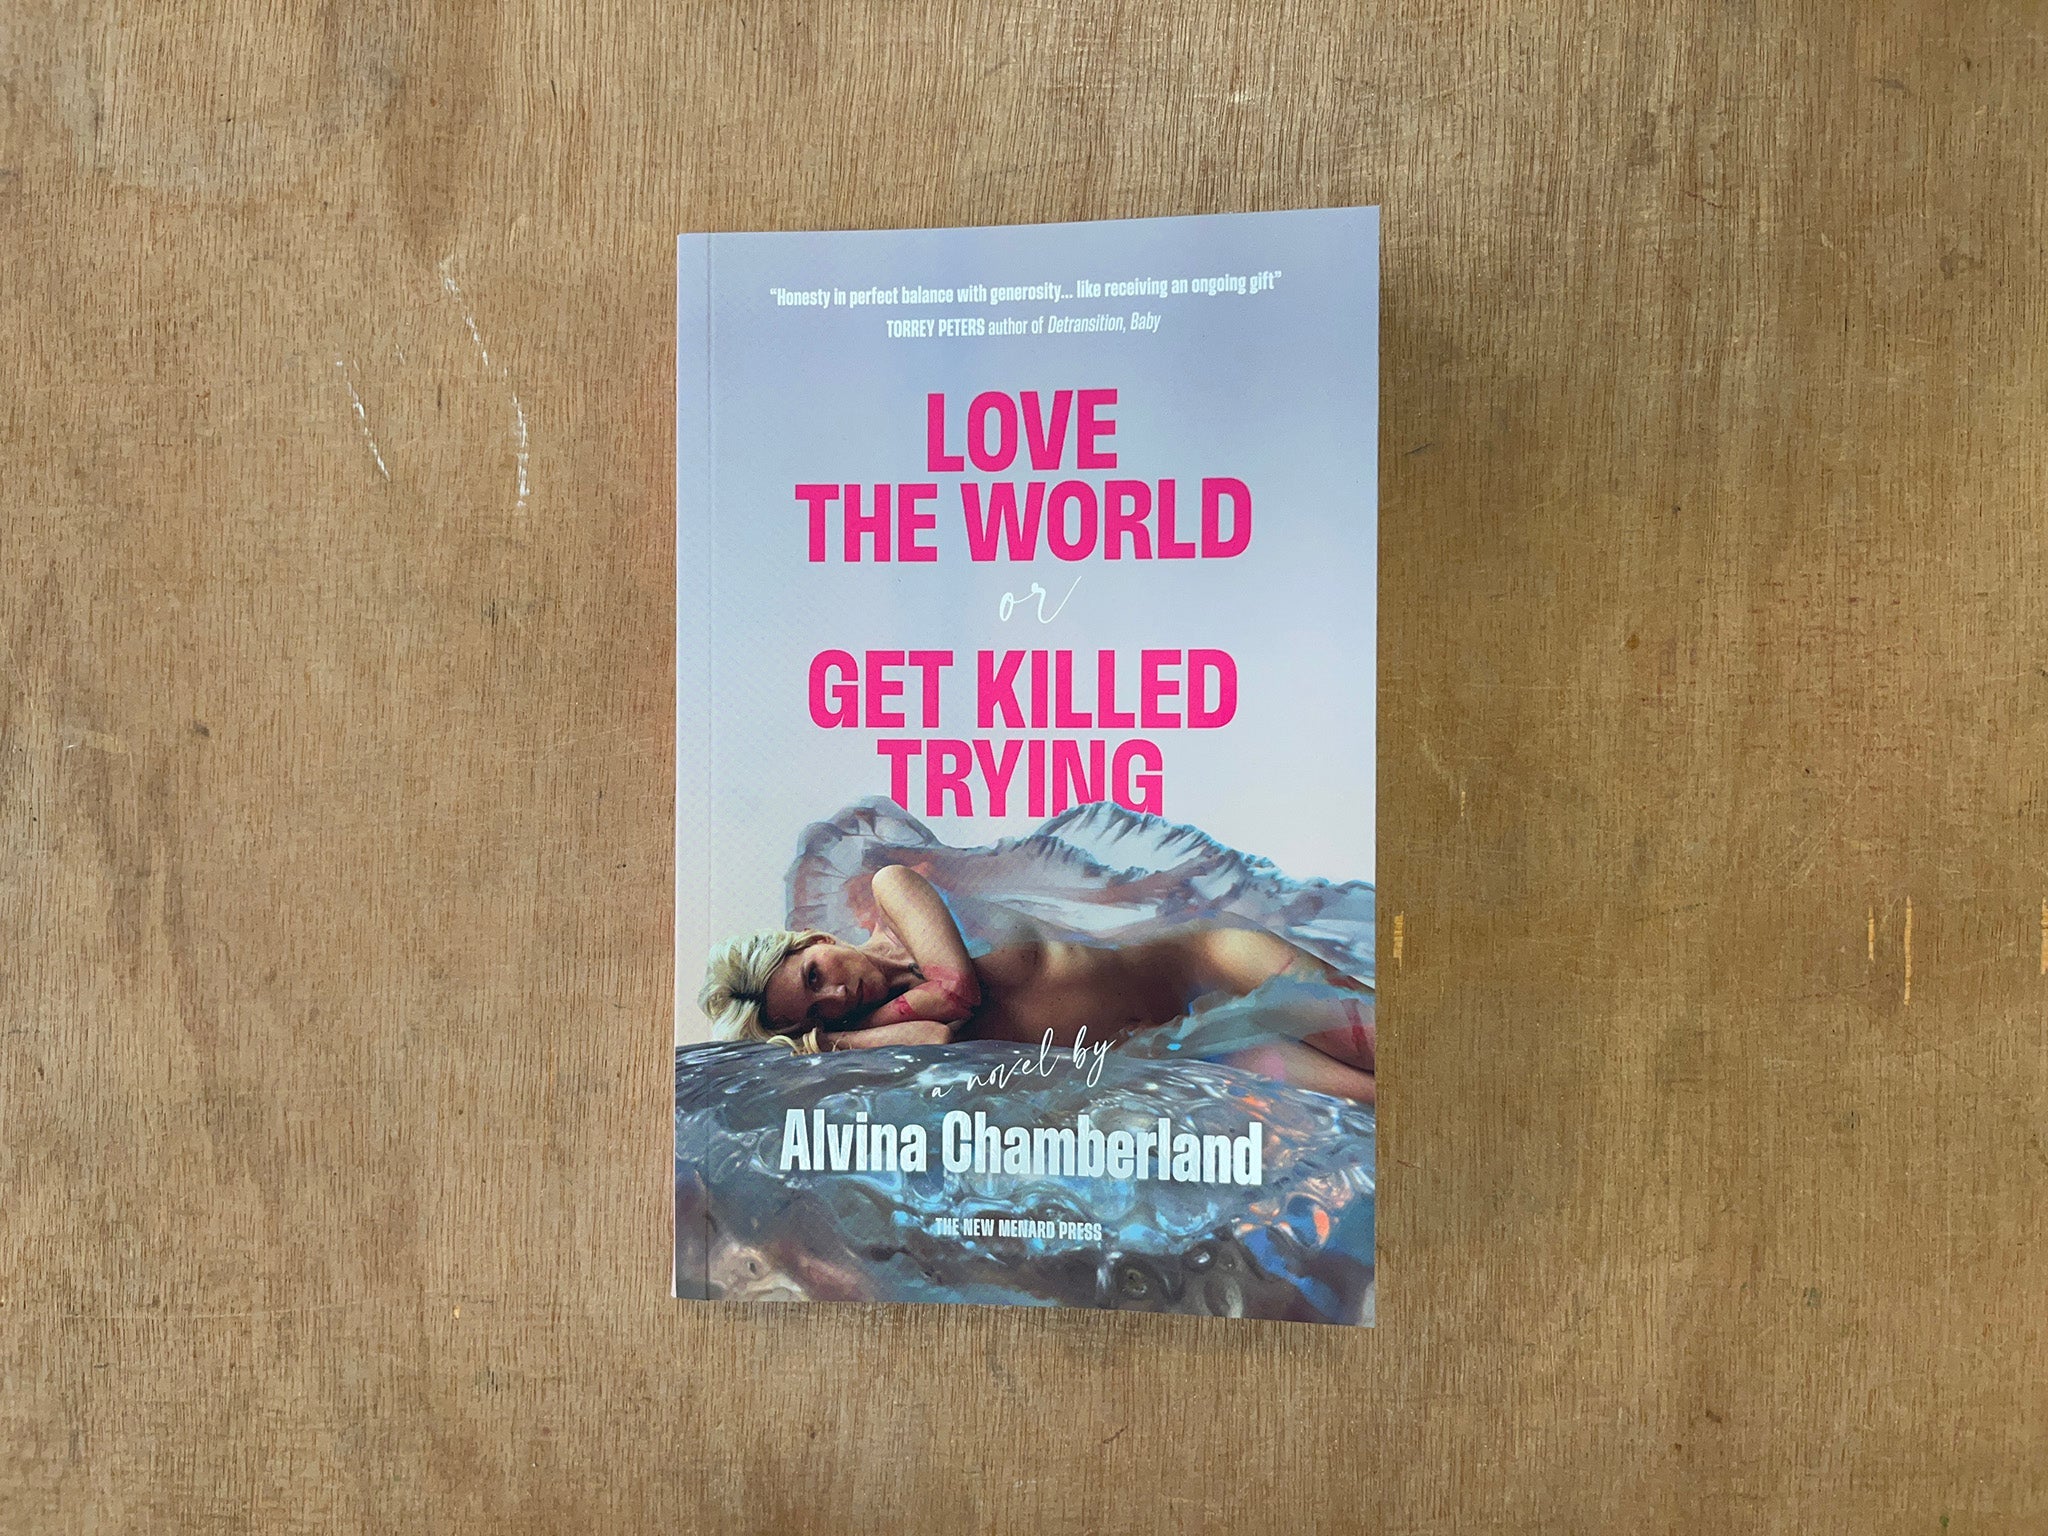 LOVE THE WORLD OR GET KILLED TRYING by Alvina Chamberland